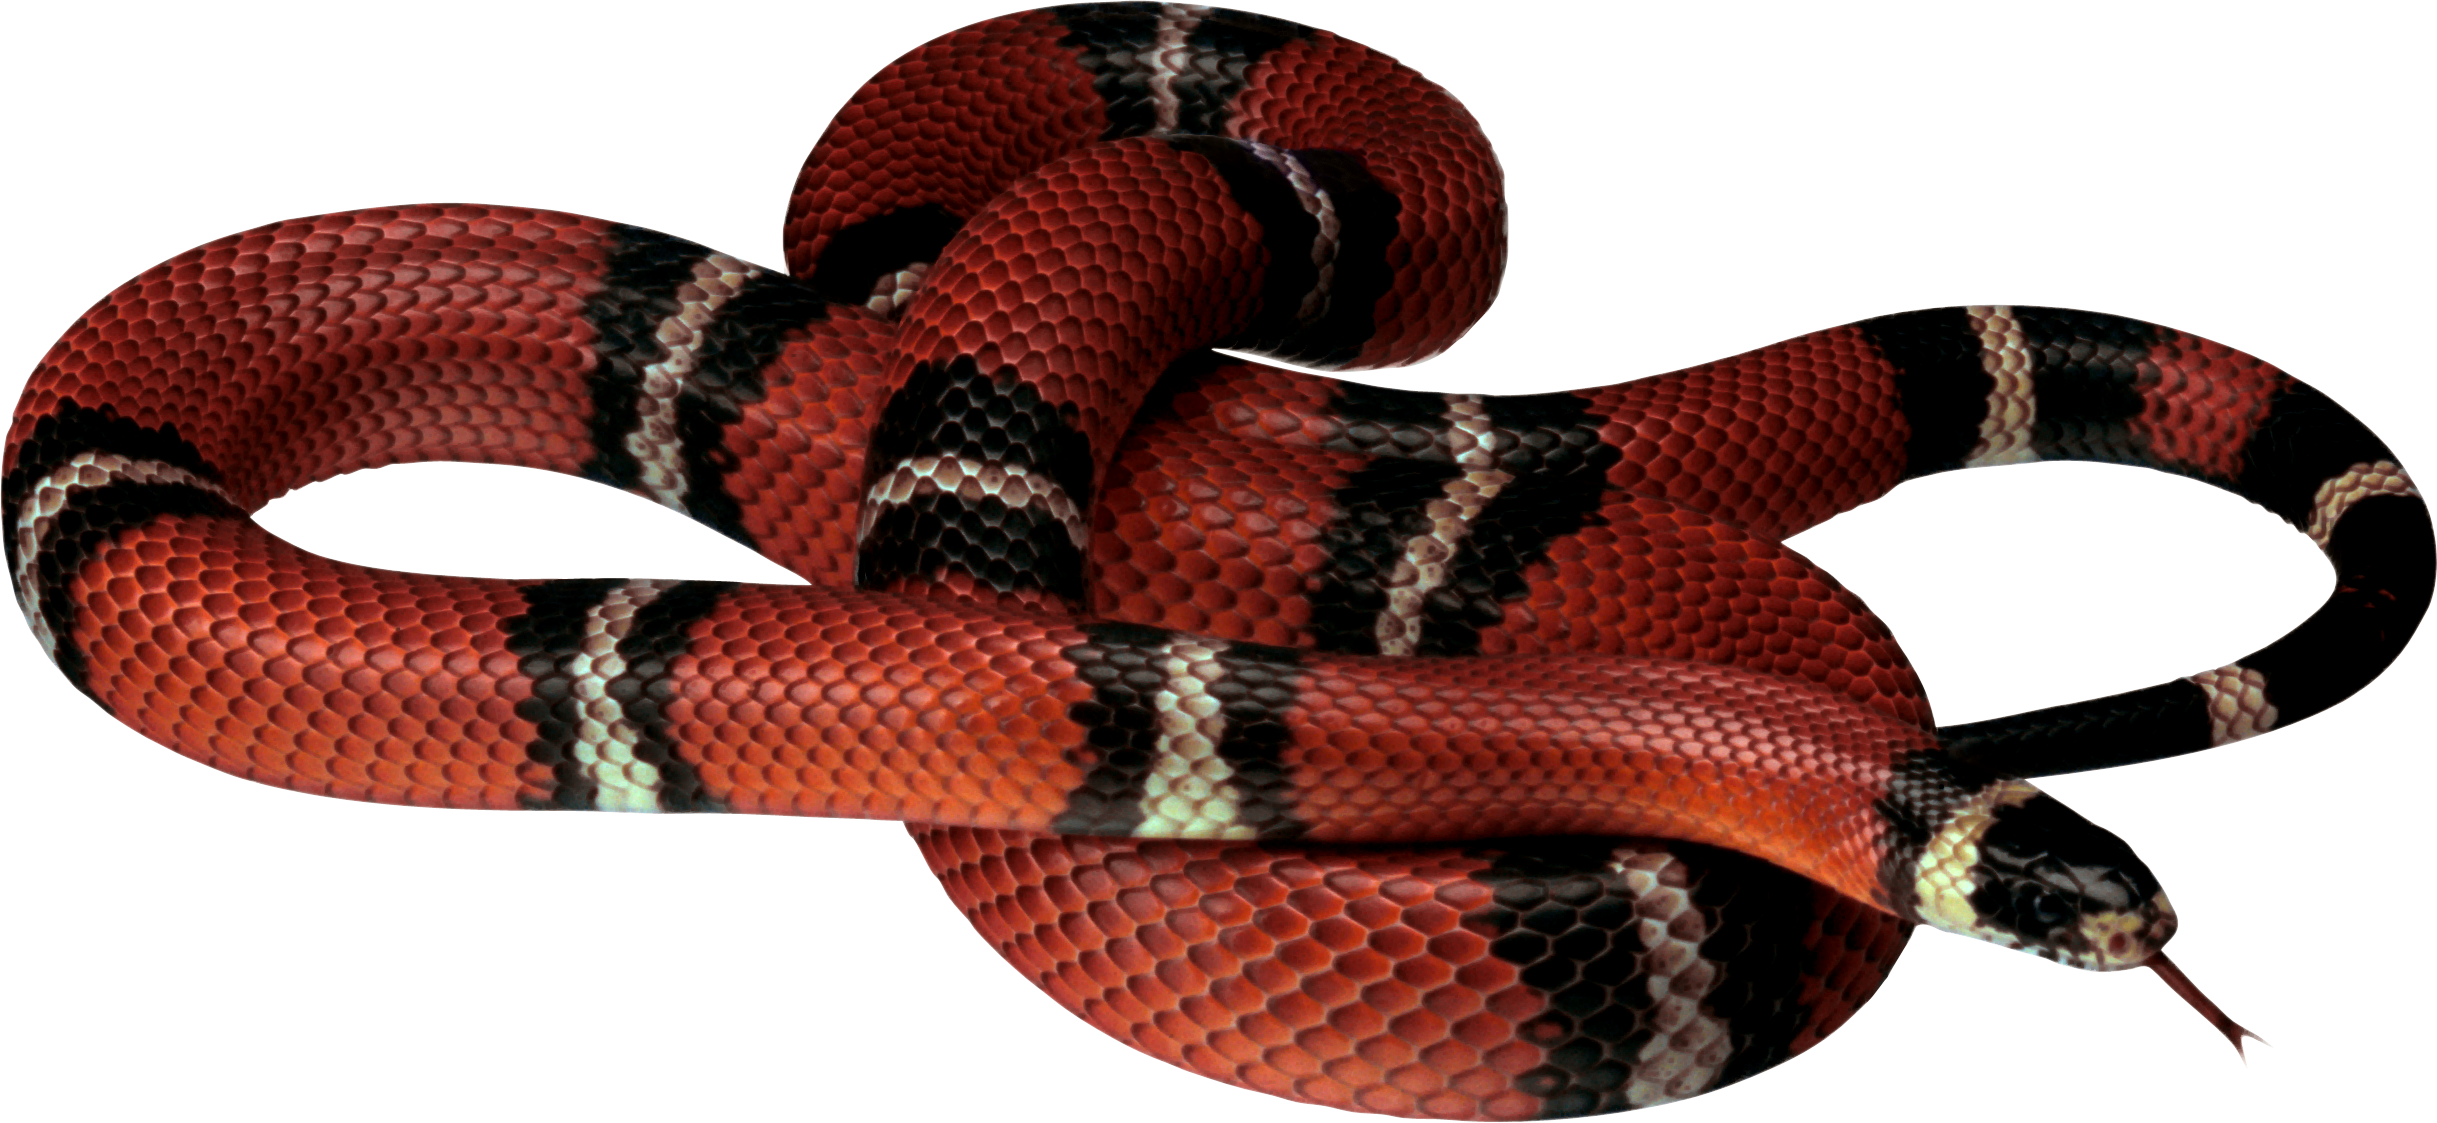 Snake PNG image, free download png picture snakes